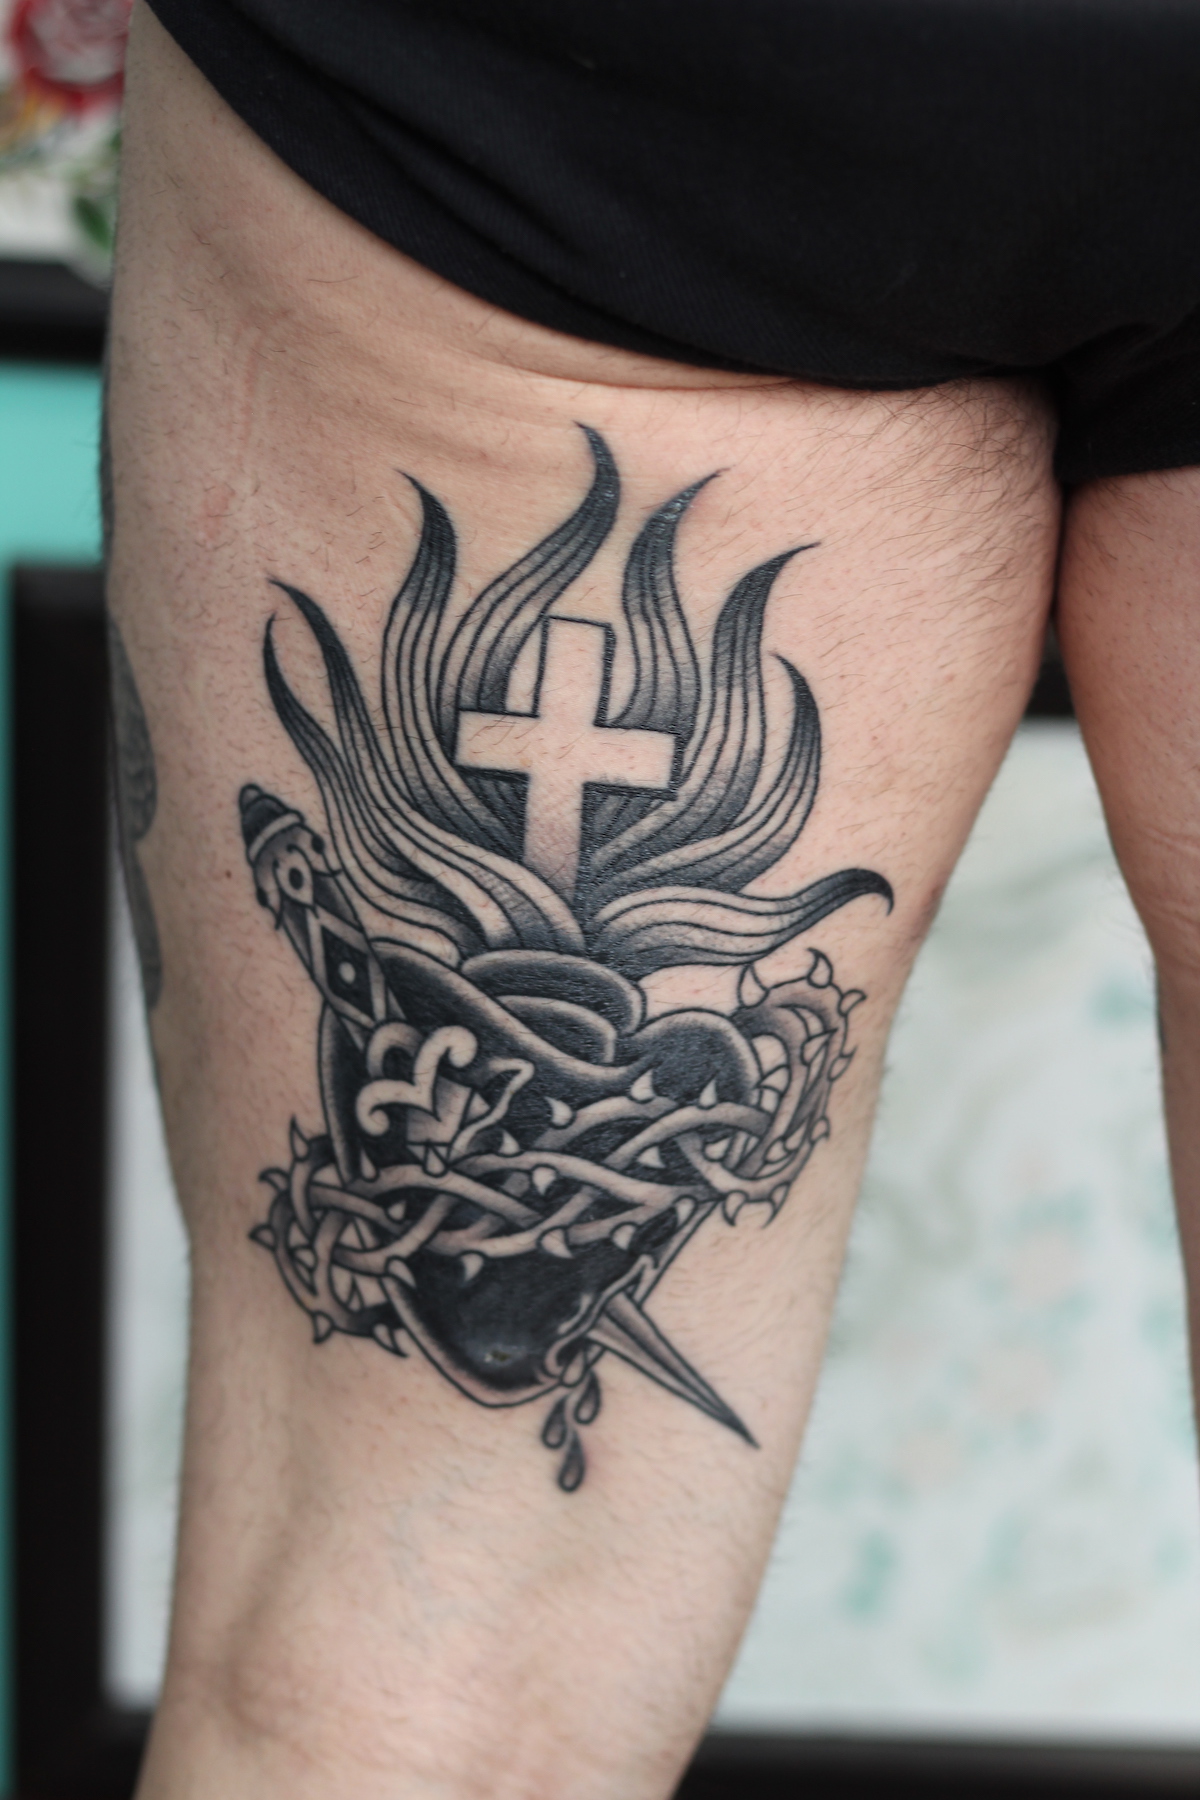 Sacred heart w/ Dagger tattooed in the American Traditional style. Made at Denver's finest Dedication Tattoo.